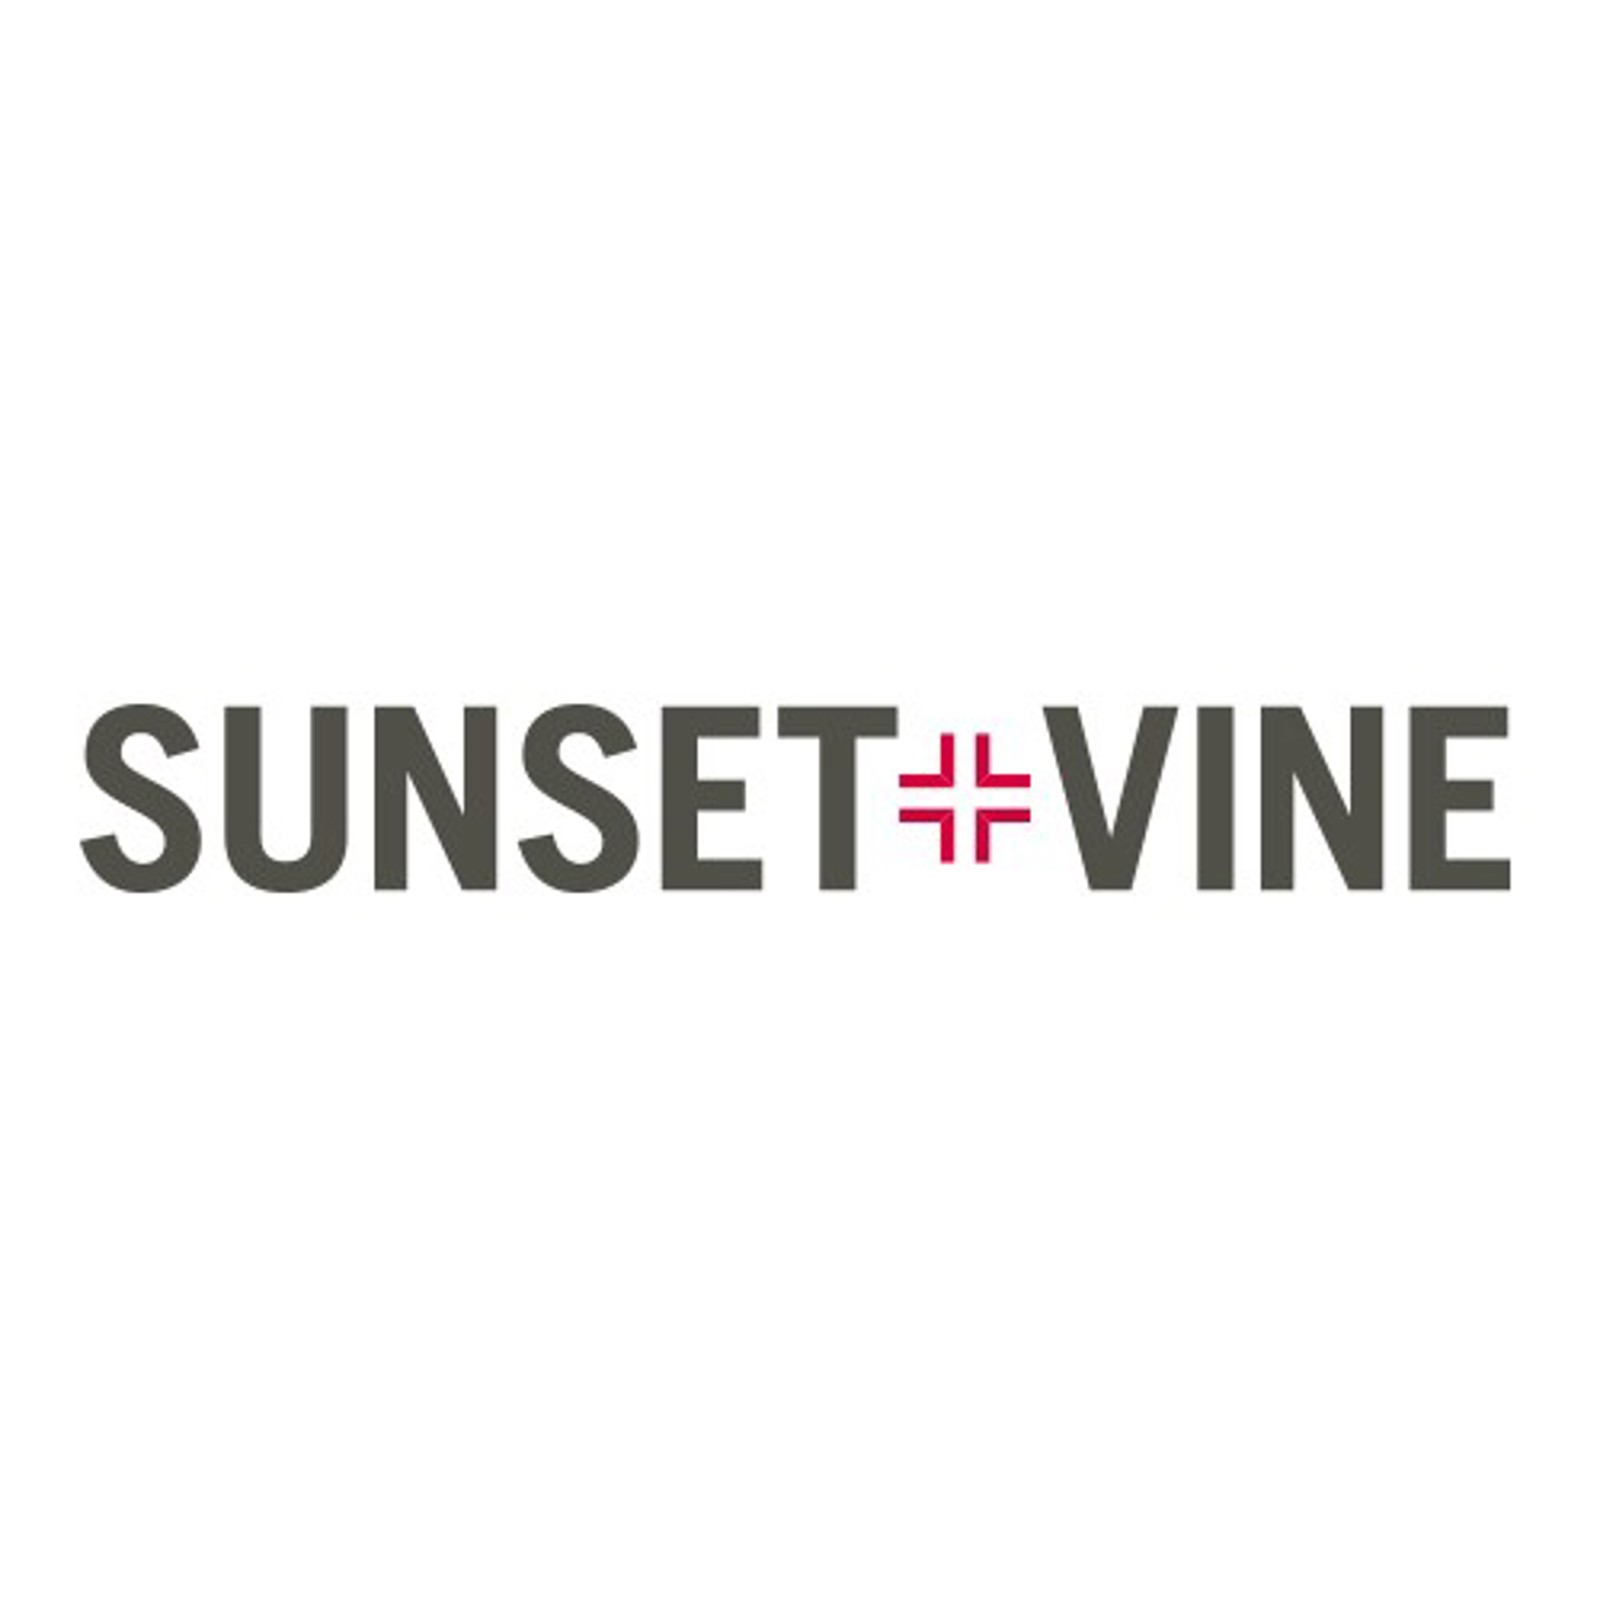 Sunset+Vine teams up with Channel 4 to bring playground favourite to British television